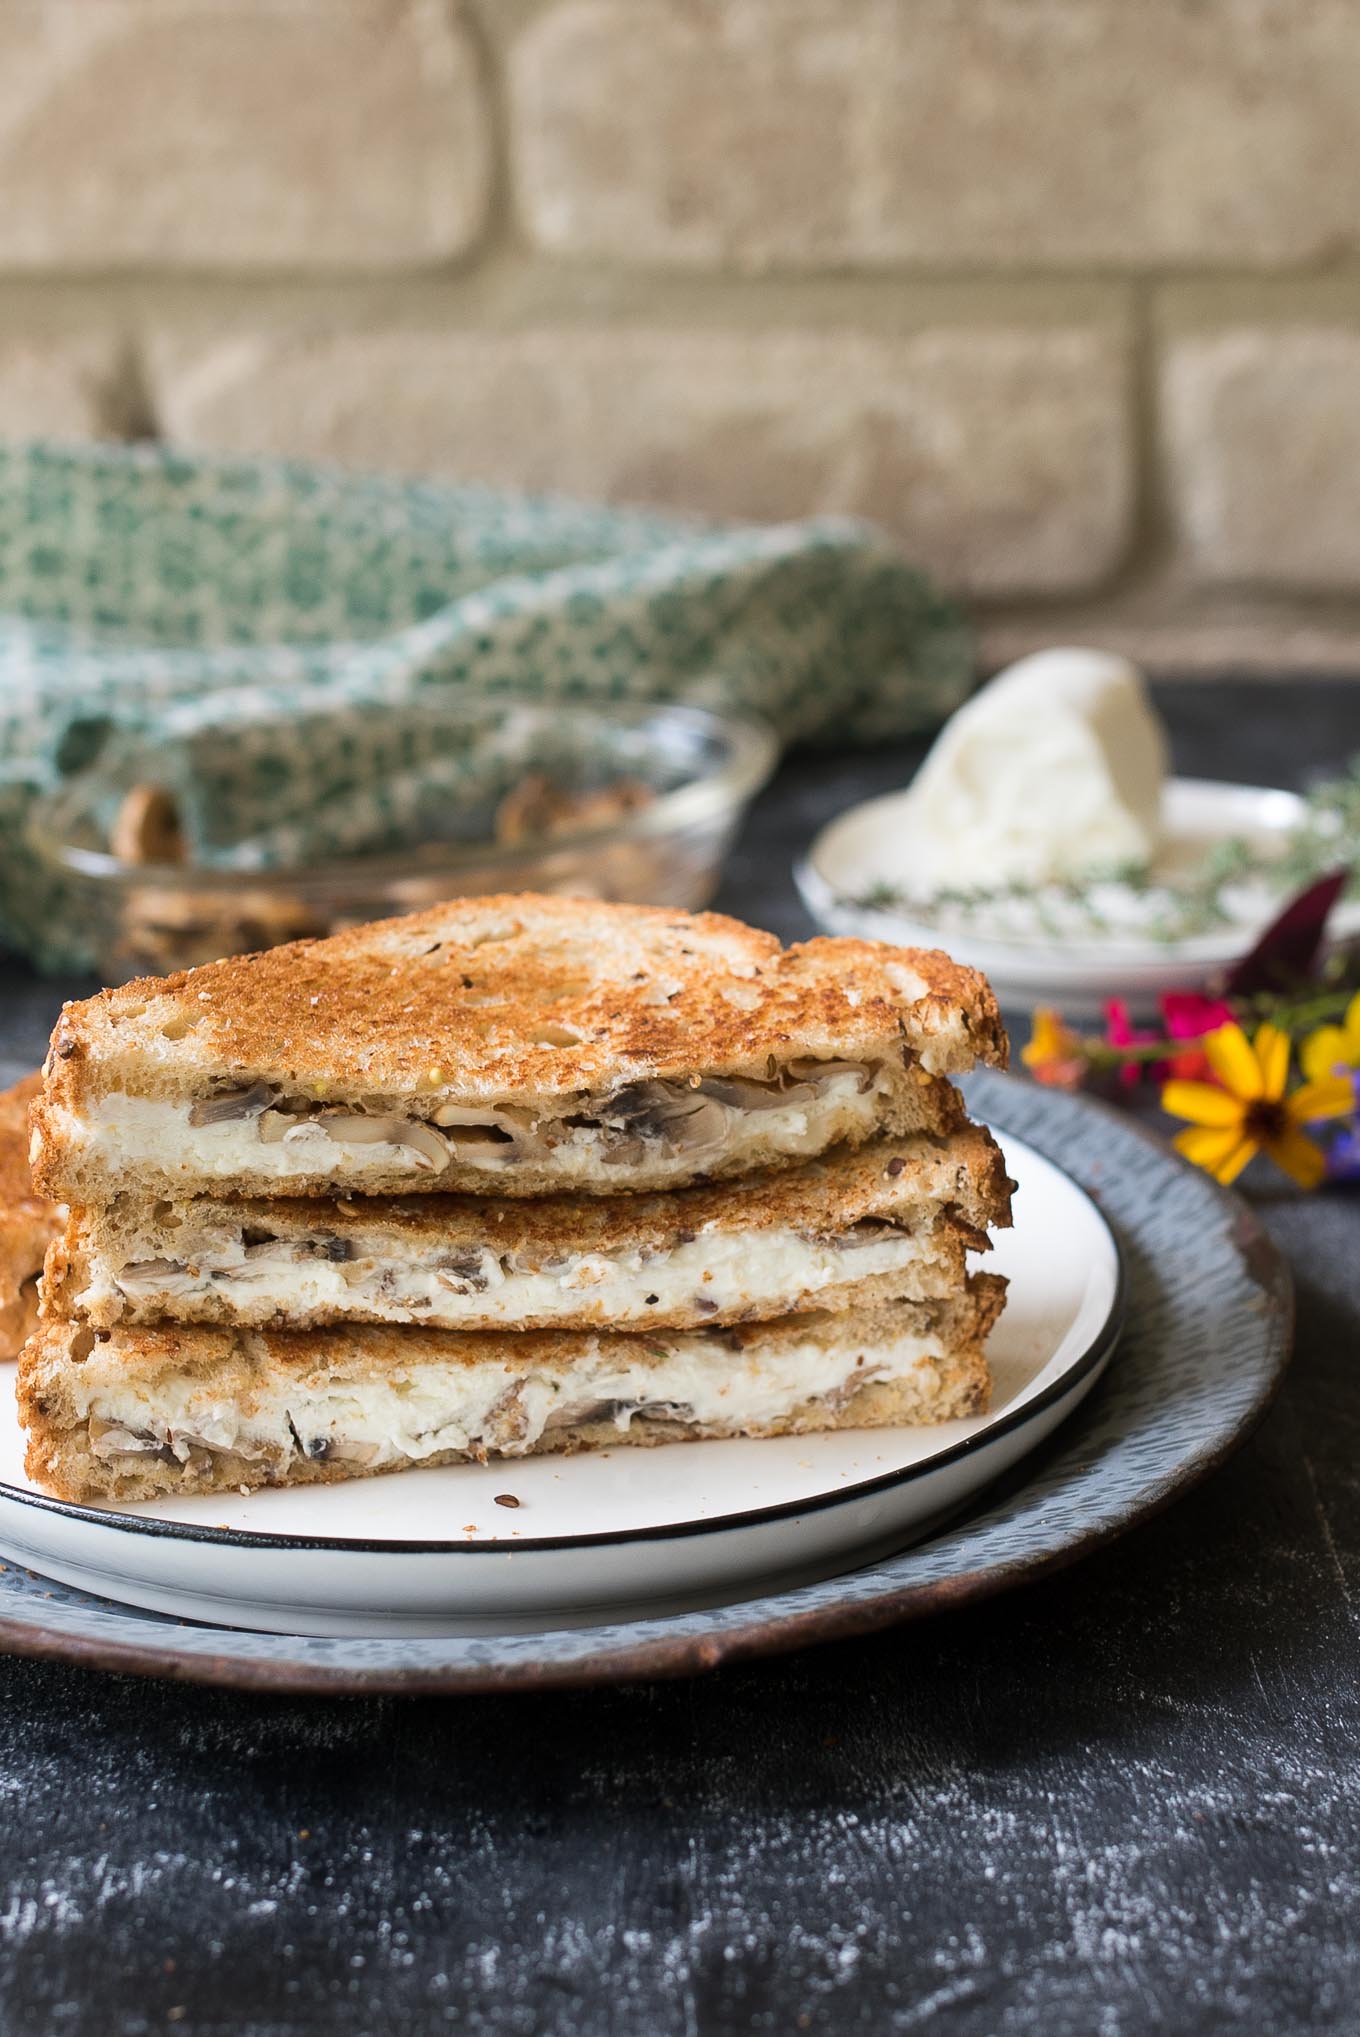 Grilled Goat Cheese Sandwiches with Mushrooms are simple yet gourmet, perfect for when you want grown-up flavors in a classic sandwich for any meal of the day.